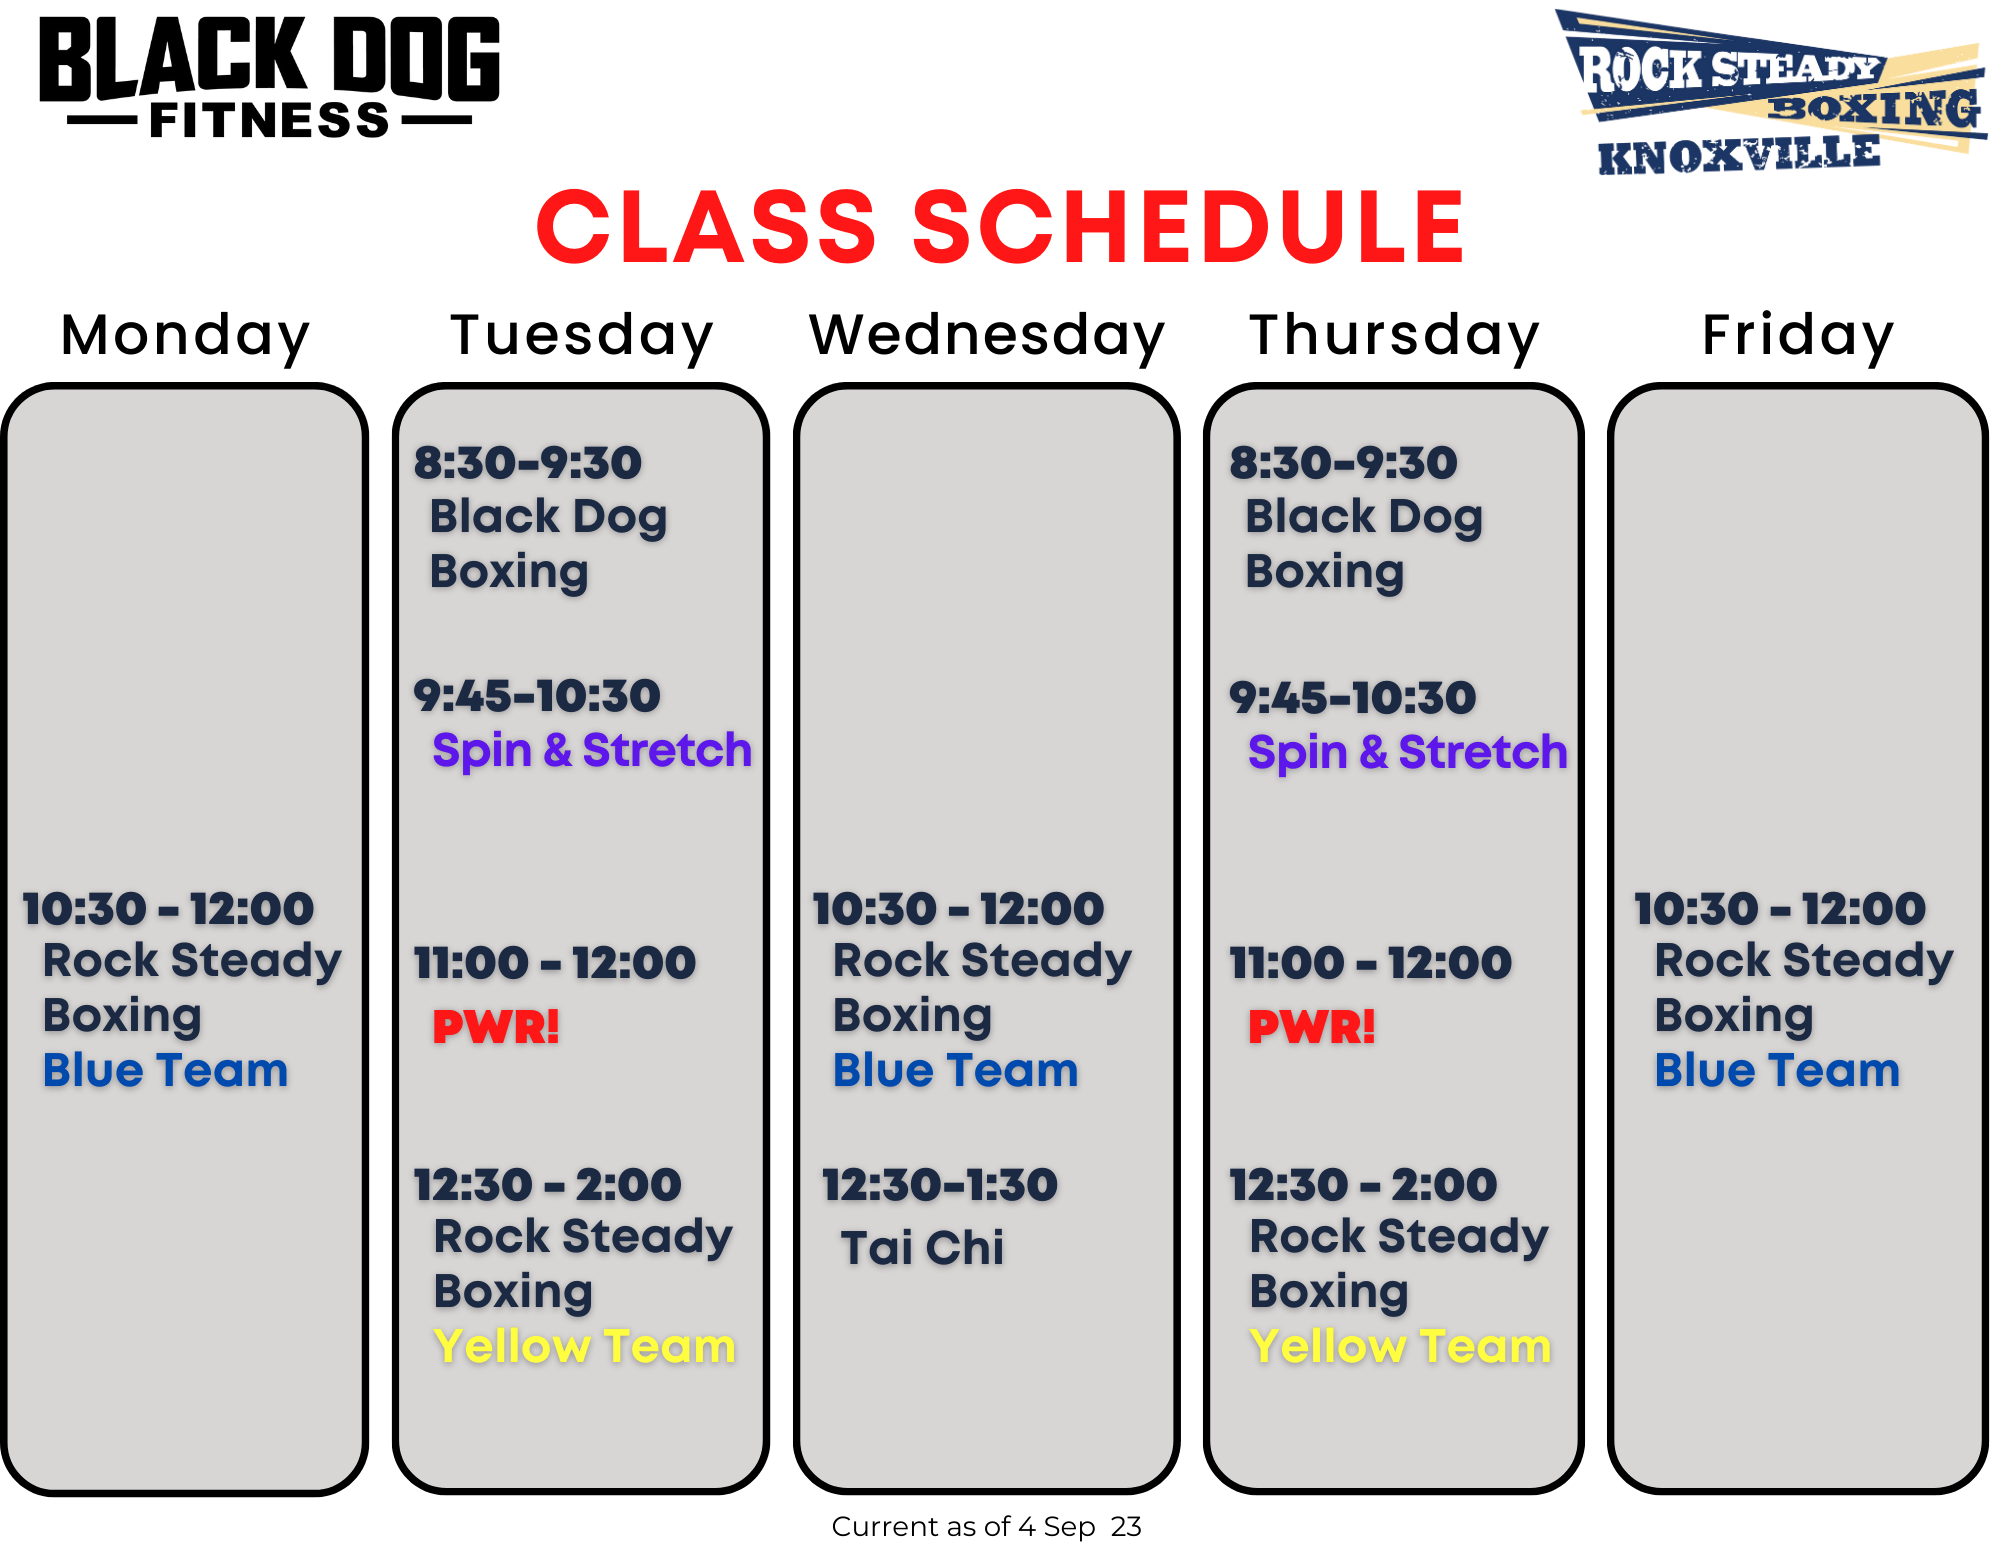 Weekly Schedule of Black Dog Fitness group fitness classes